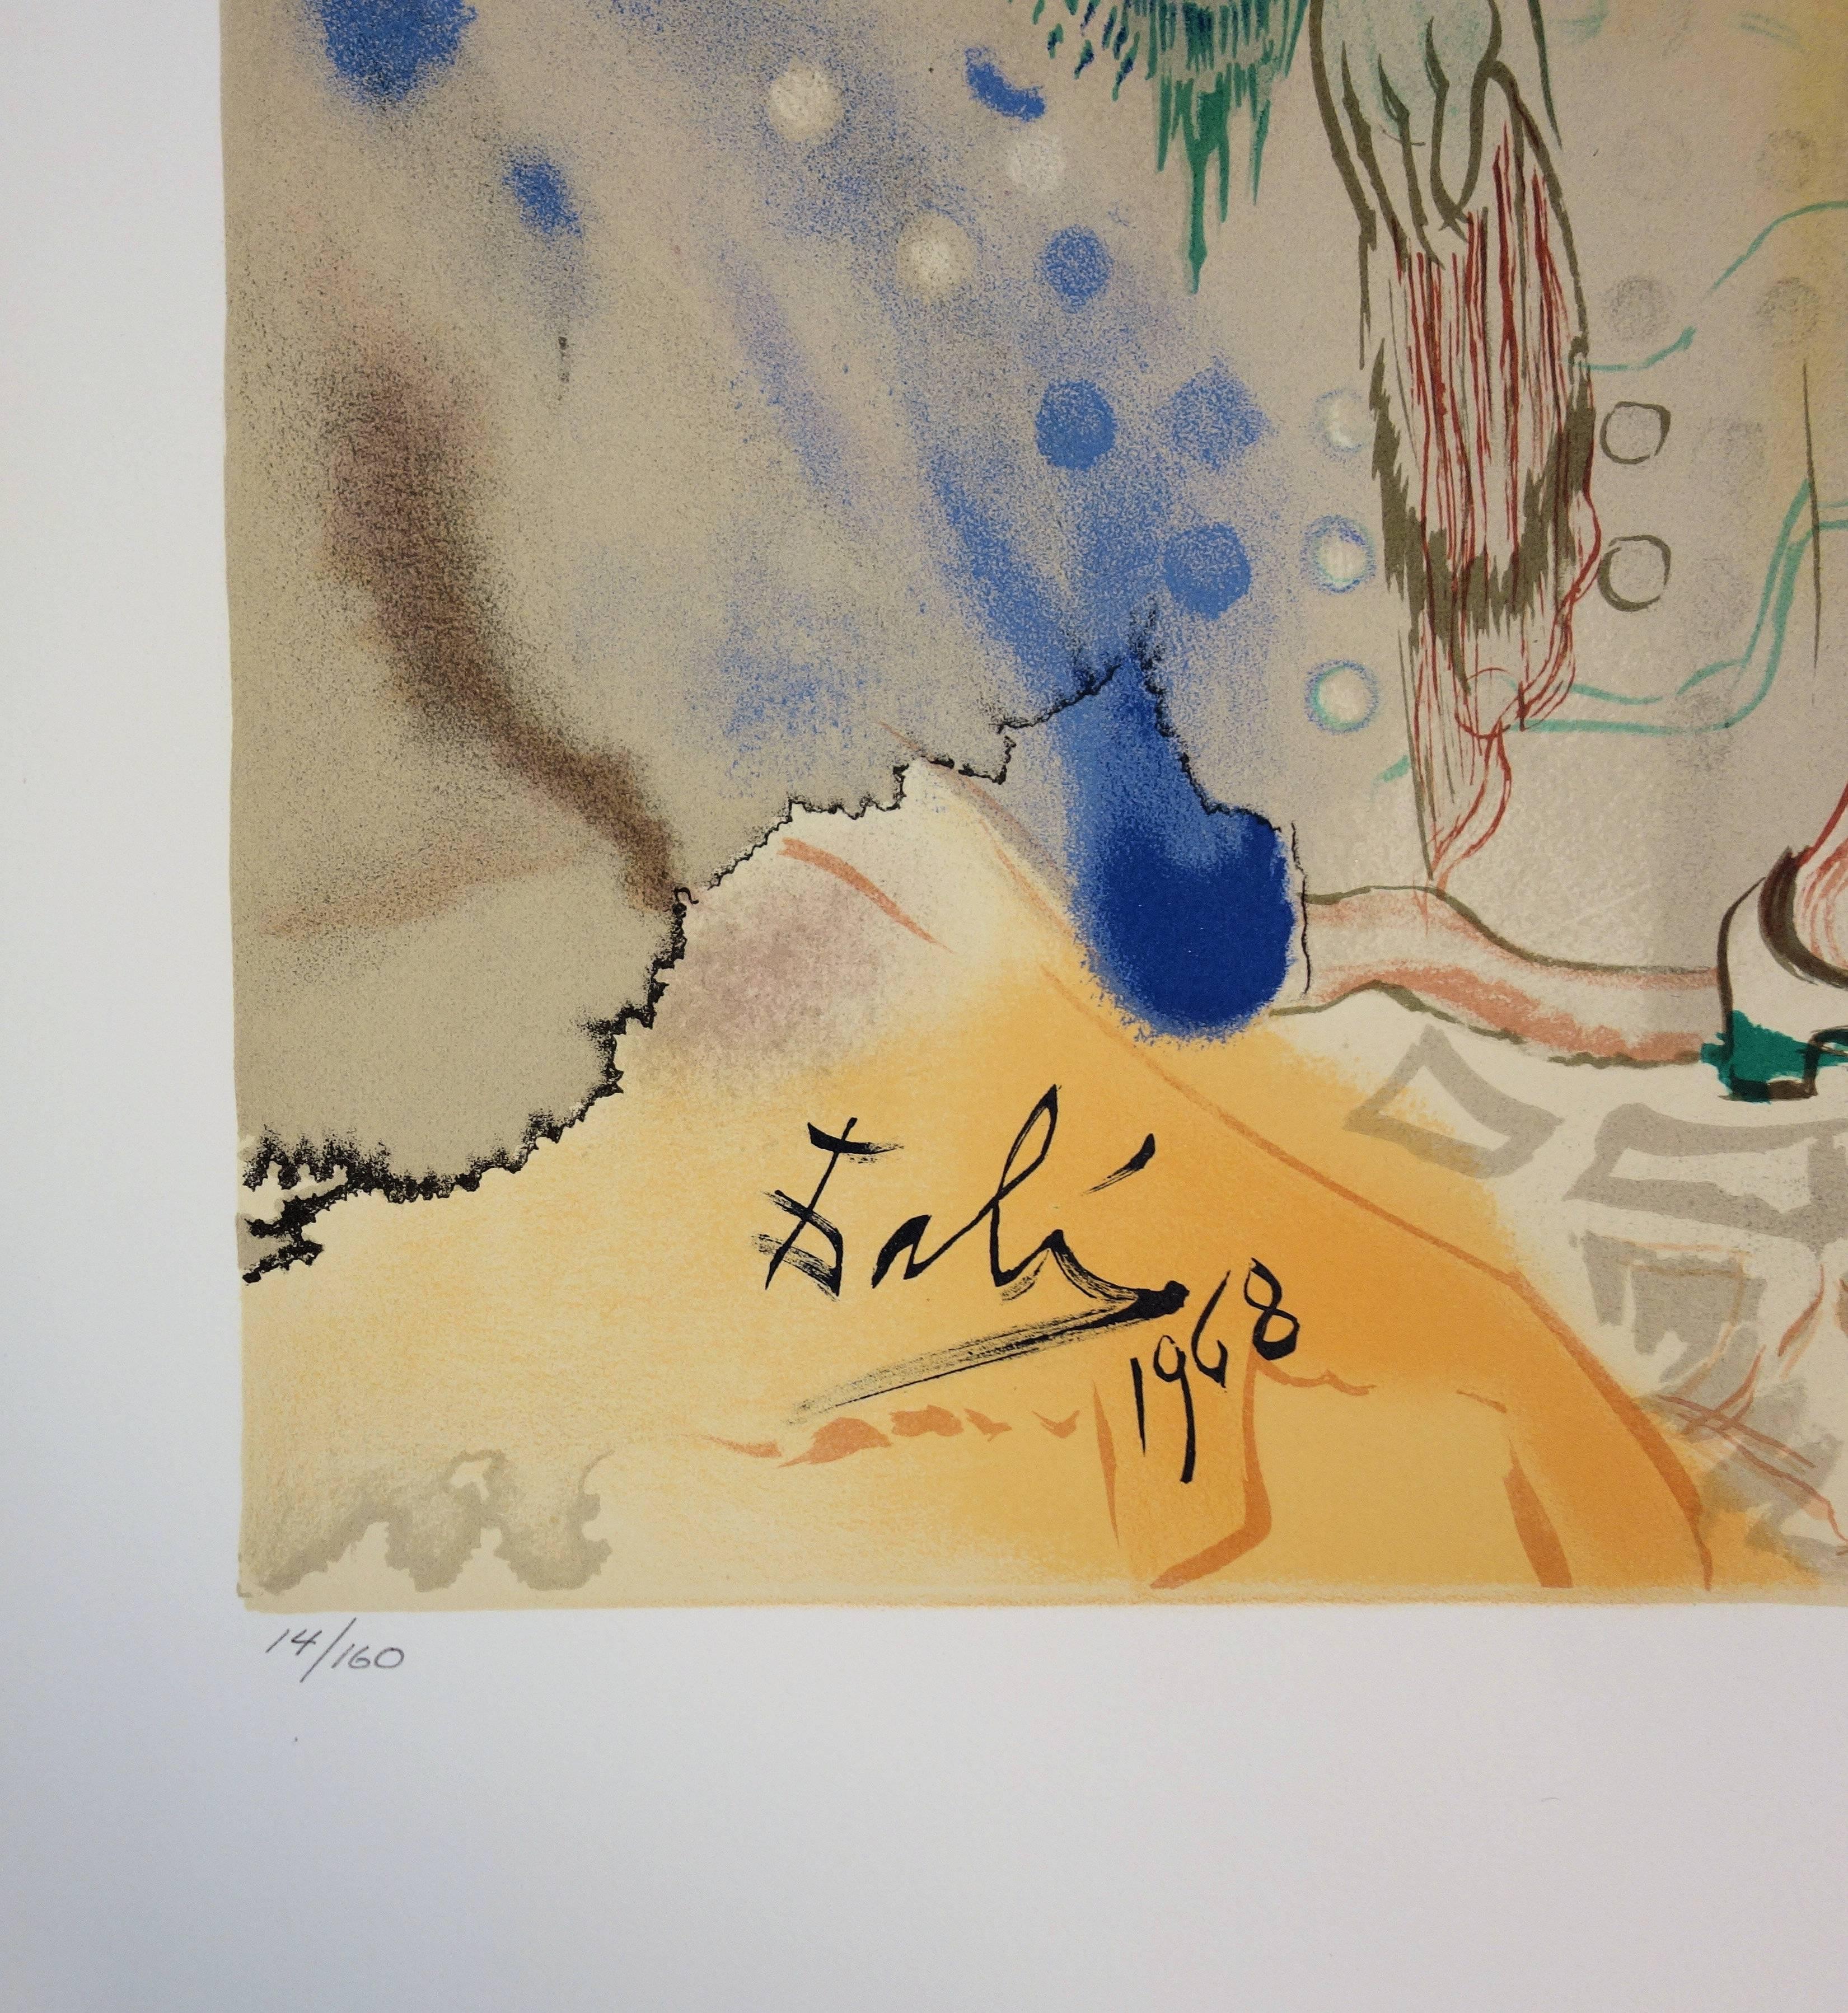 Salvador DALI
Dumont and Marton

Stone lithograph
Handsigned in pencil
Numbered /160 copies
On Arches vellum 65 x 50 cm (25 5/8  x 19 5/8 in.)

REFERENCES : 
- Catalog raisonne Field #69-1 S
- Catalog raisonne Michel and Lopsinger #1254
This